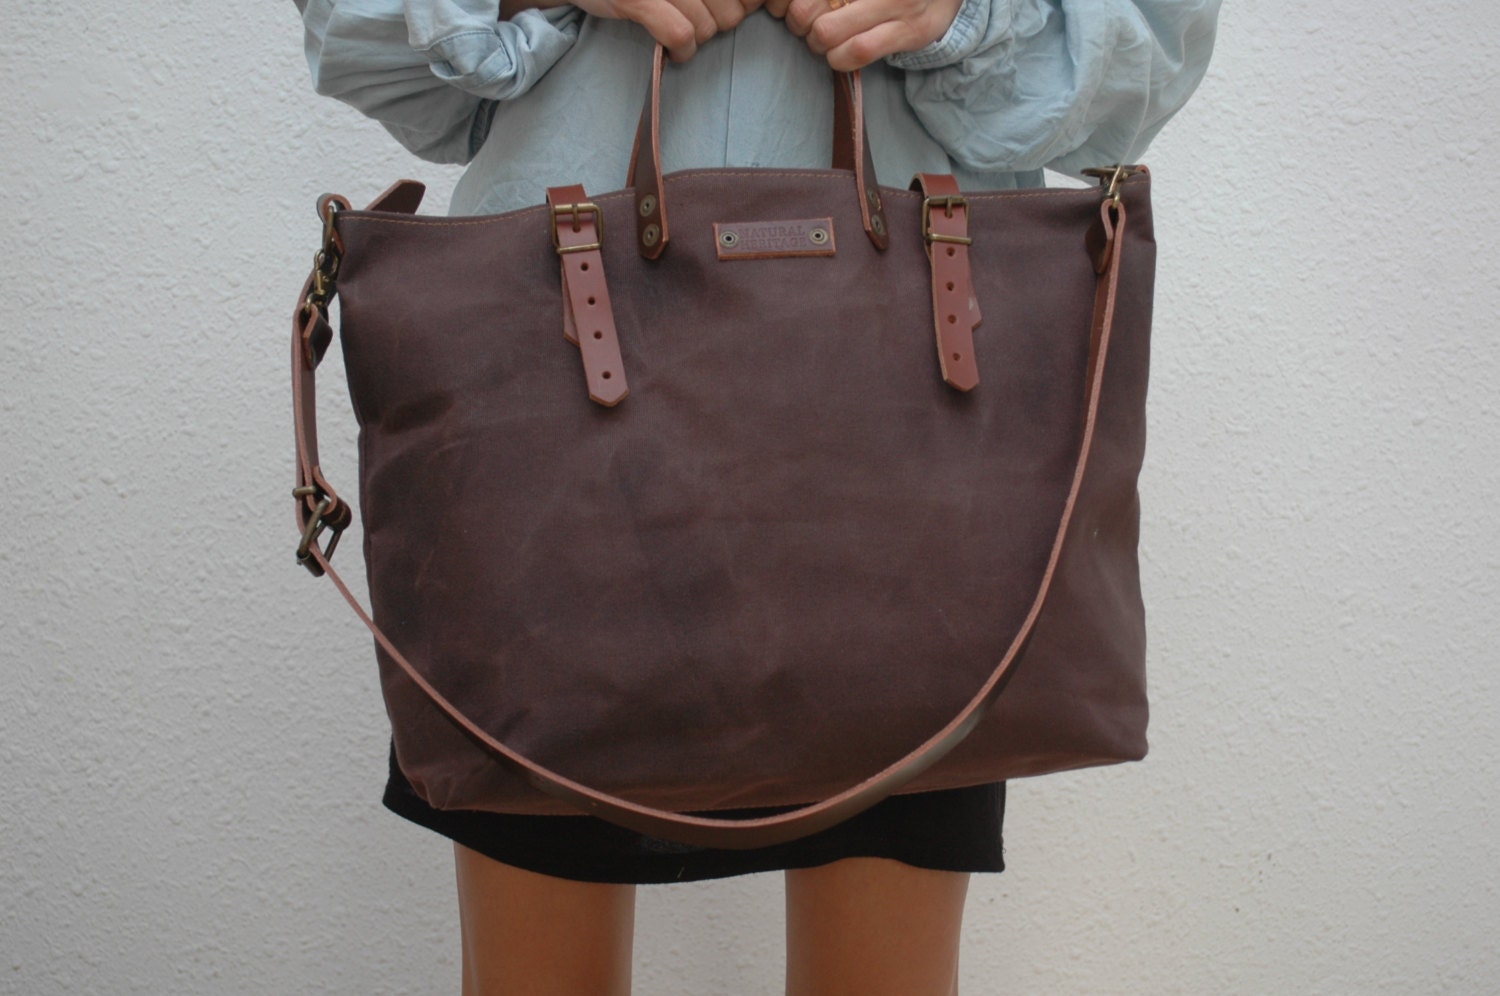 waxed canvas bag with leather handles and closuresbronze